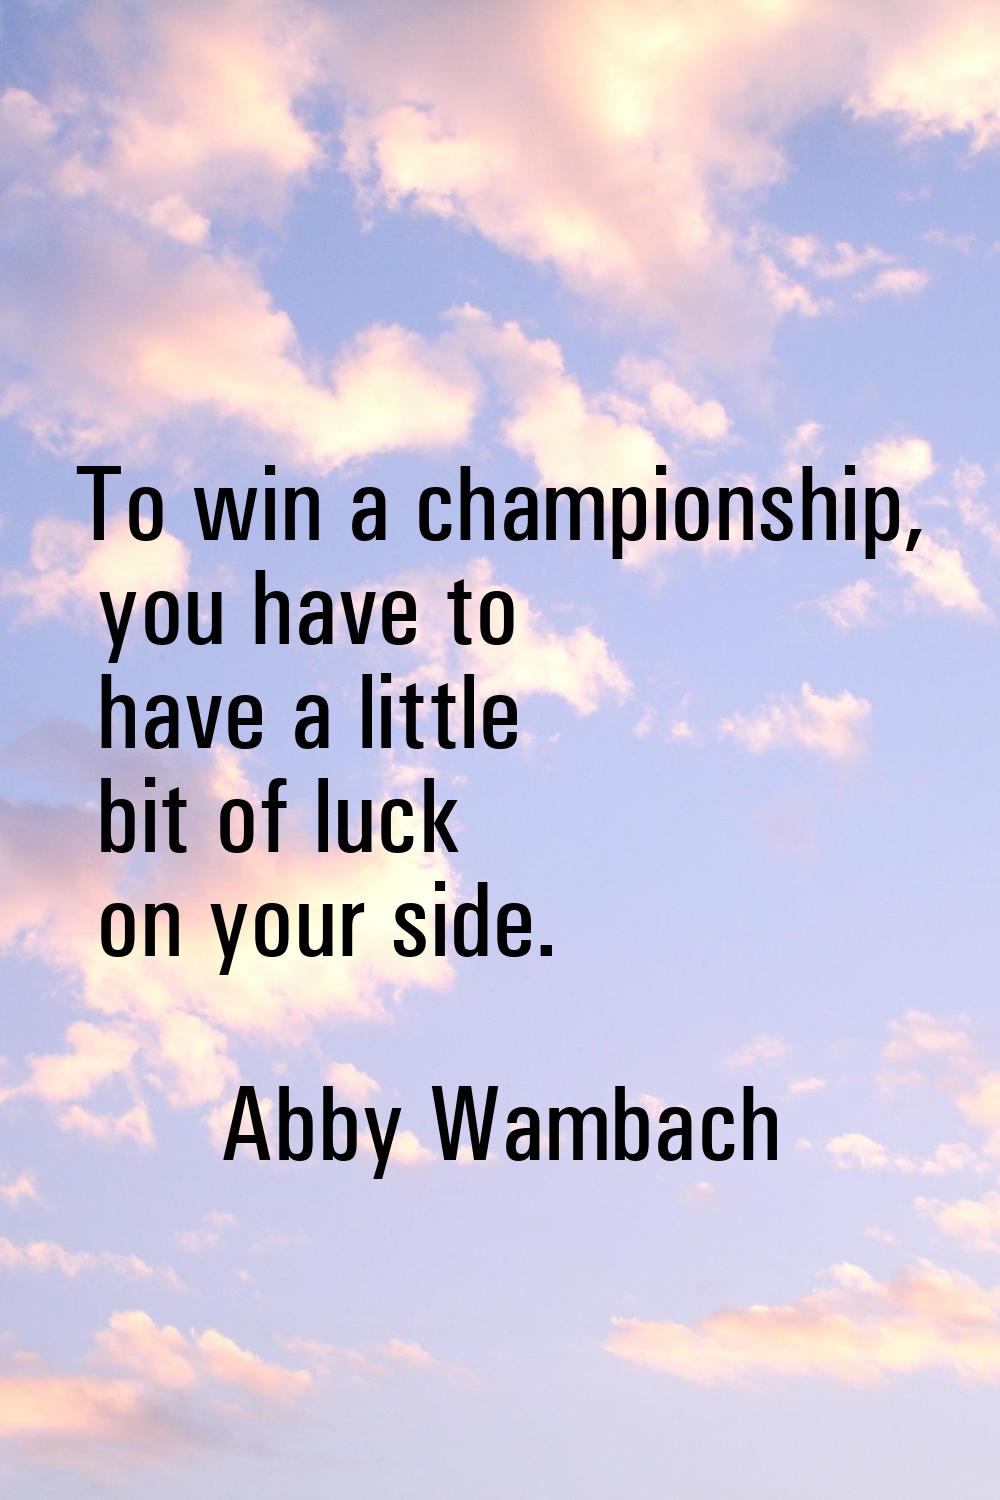 To win a championship, you have to have a little bit of luck on your side.